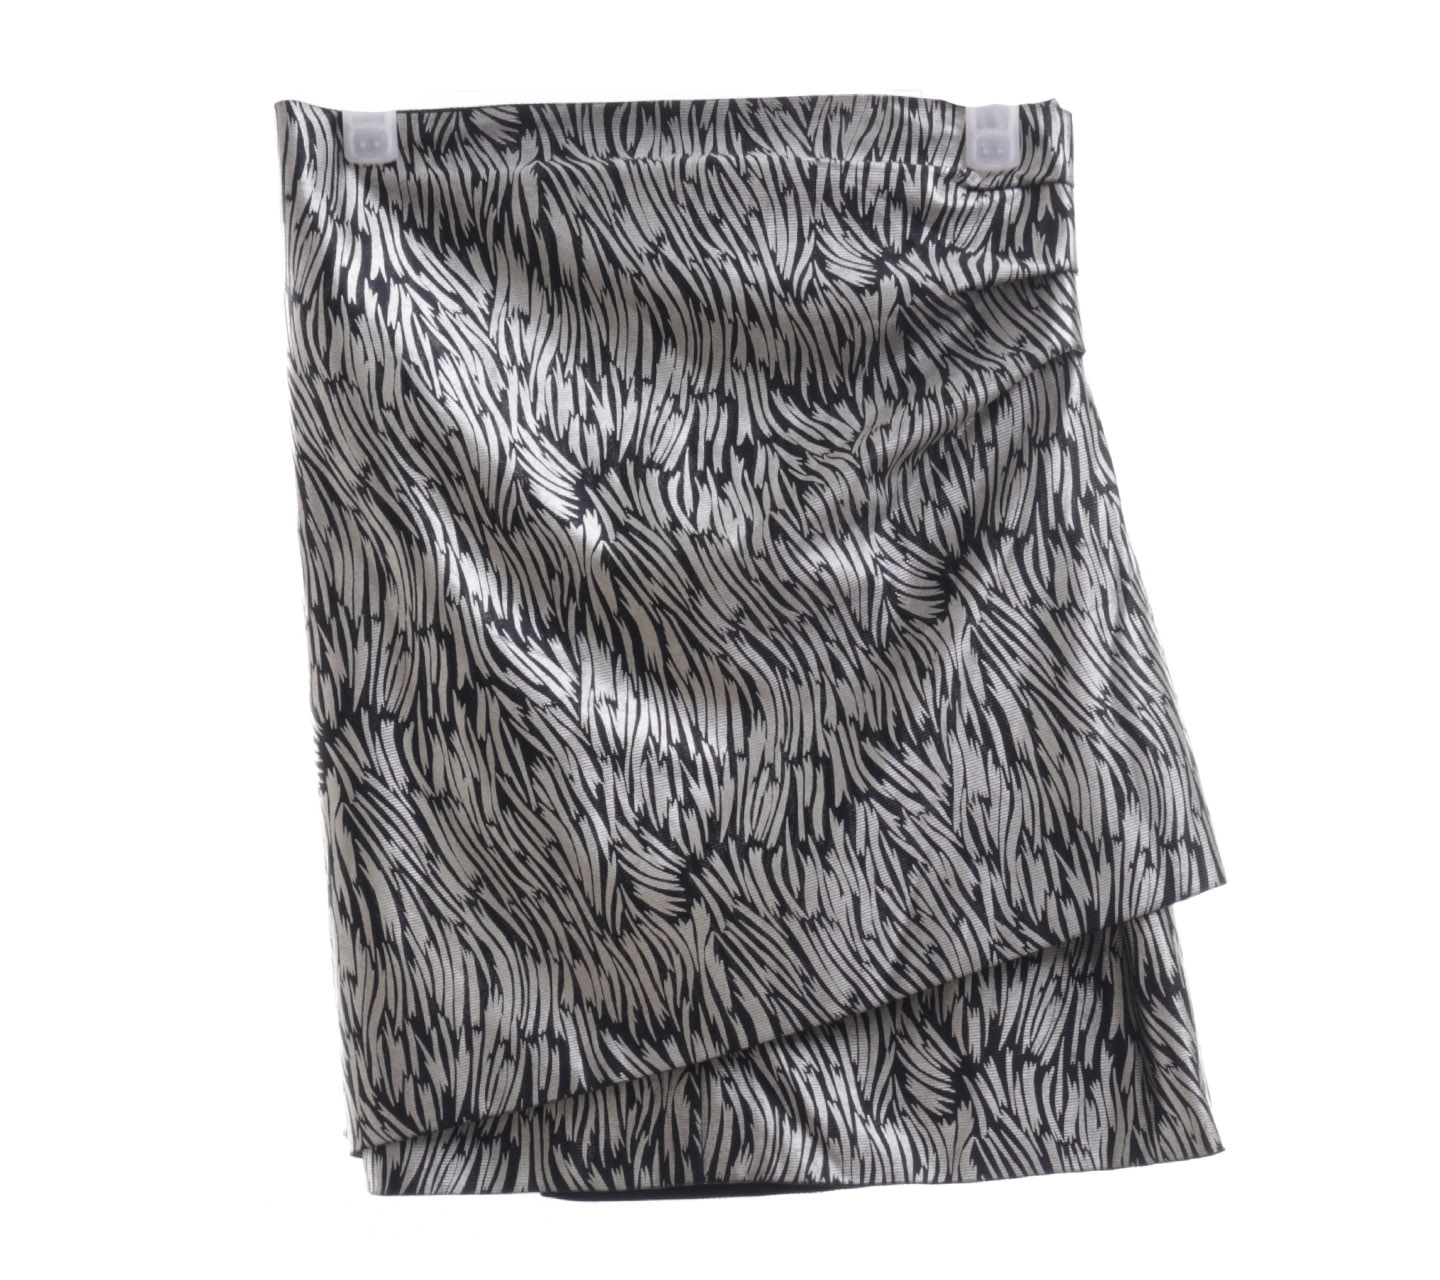 Day and Night Silver & Black Printed Mini Skirt